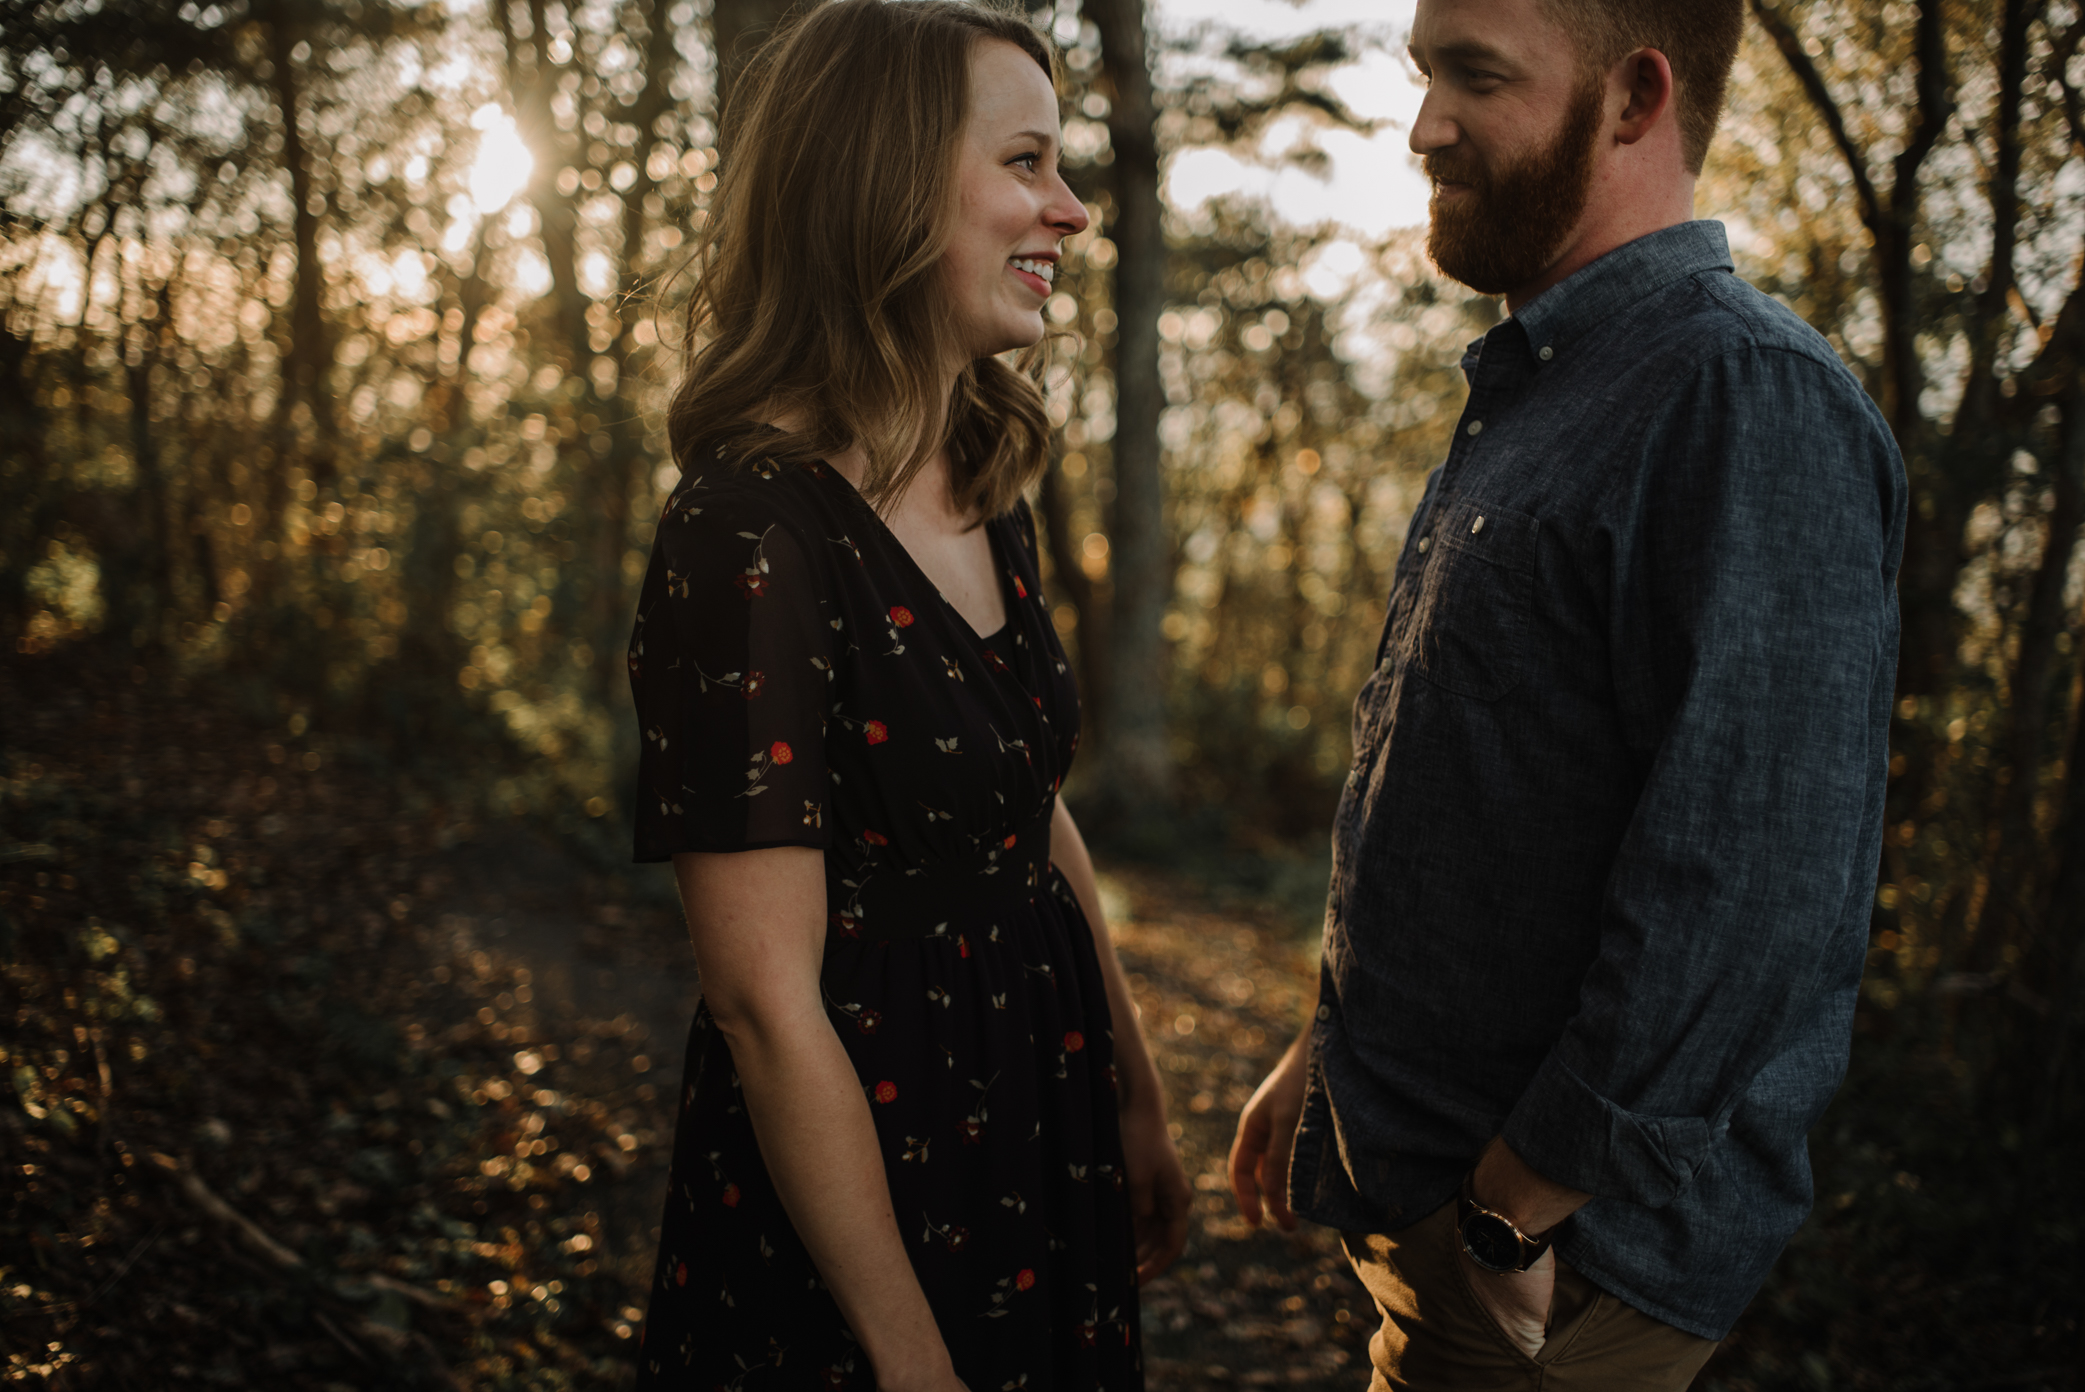 Molly and Zach Engagement Session - Fall Autumn Sunset Couple Adventure Session - Shenandoah National Park - Blue Ridge Parkway Skyline Drive - White Sails Creative_25.JPG